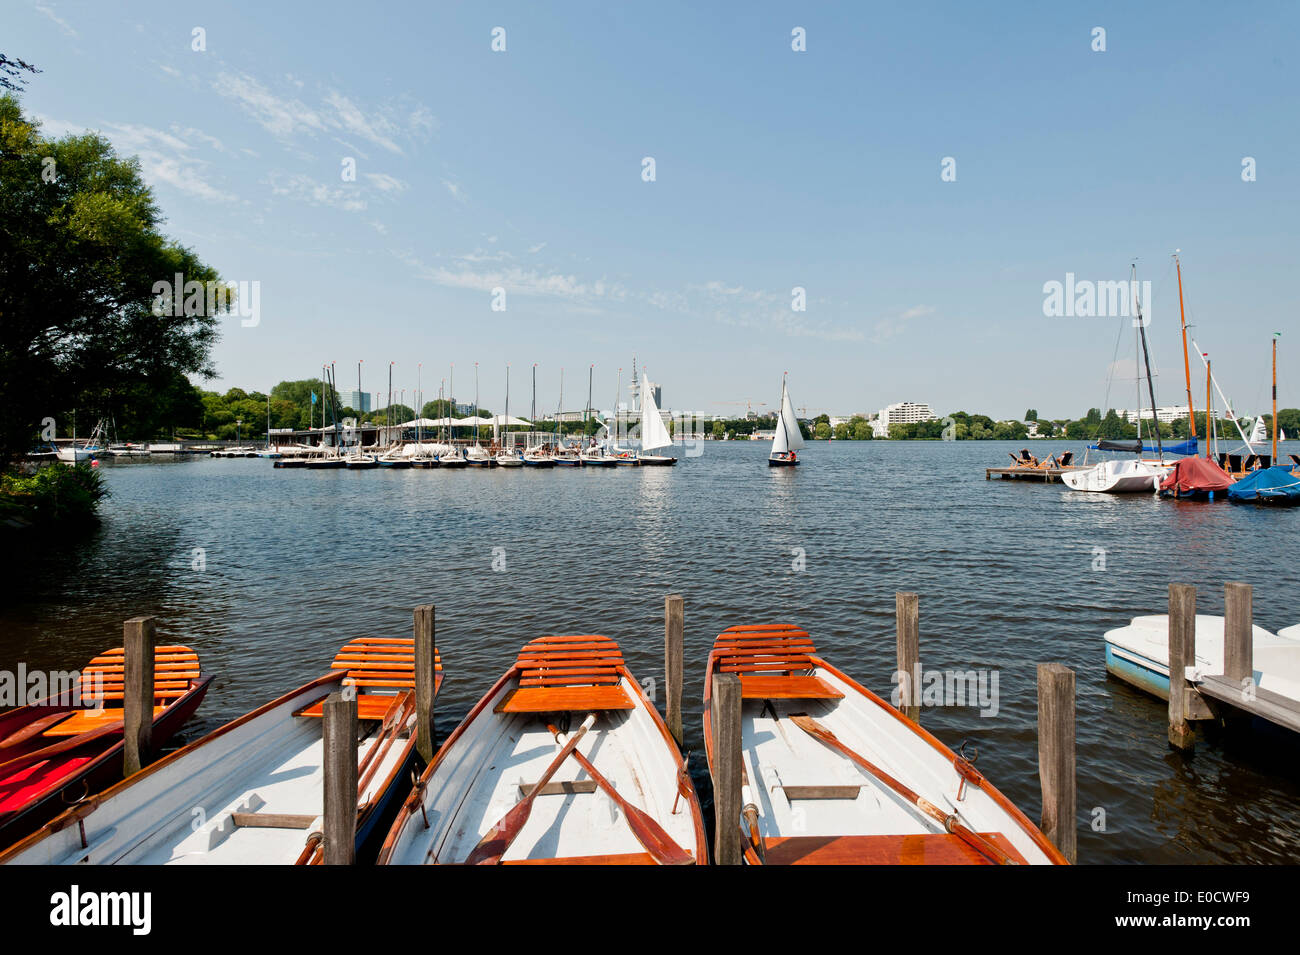 Boats at the Aussenalster river, St. Georg, Hamburg, Germany, Europe Stock Photo